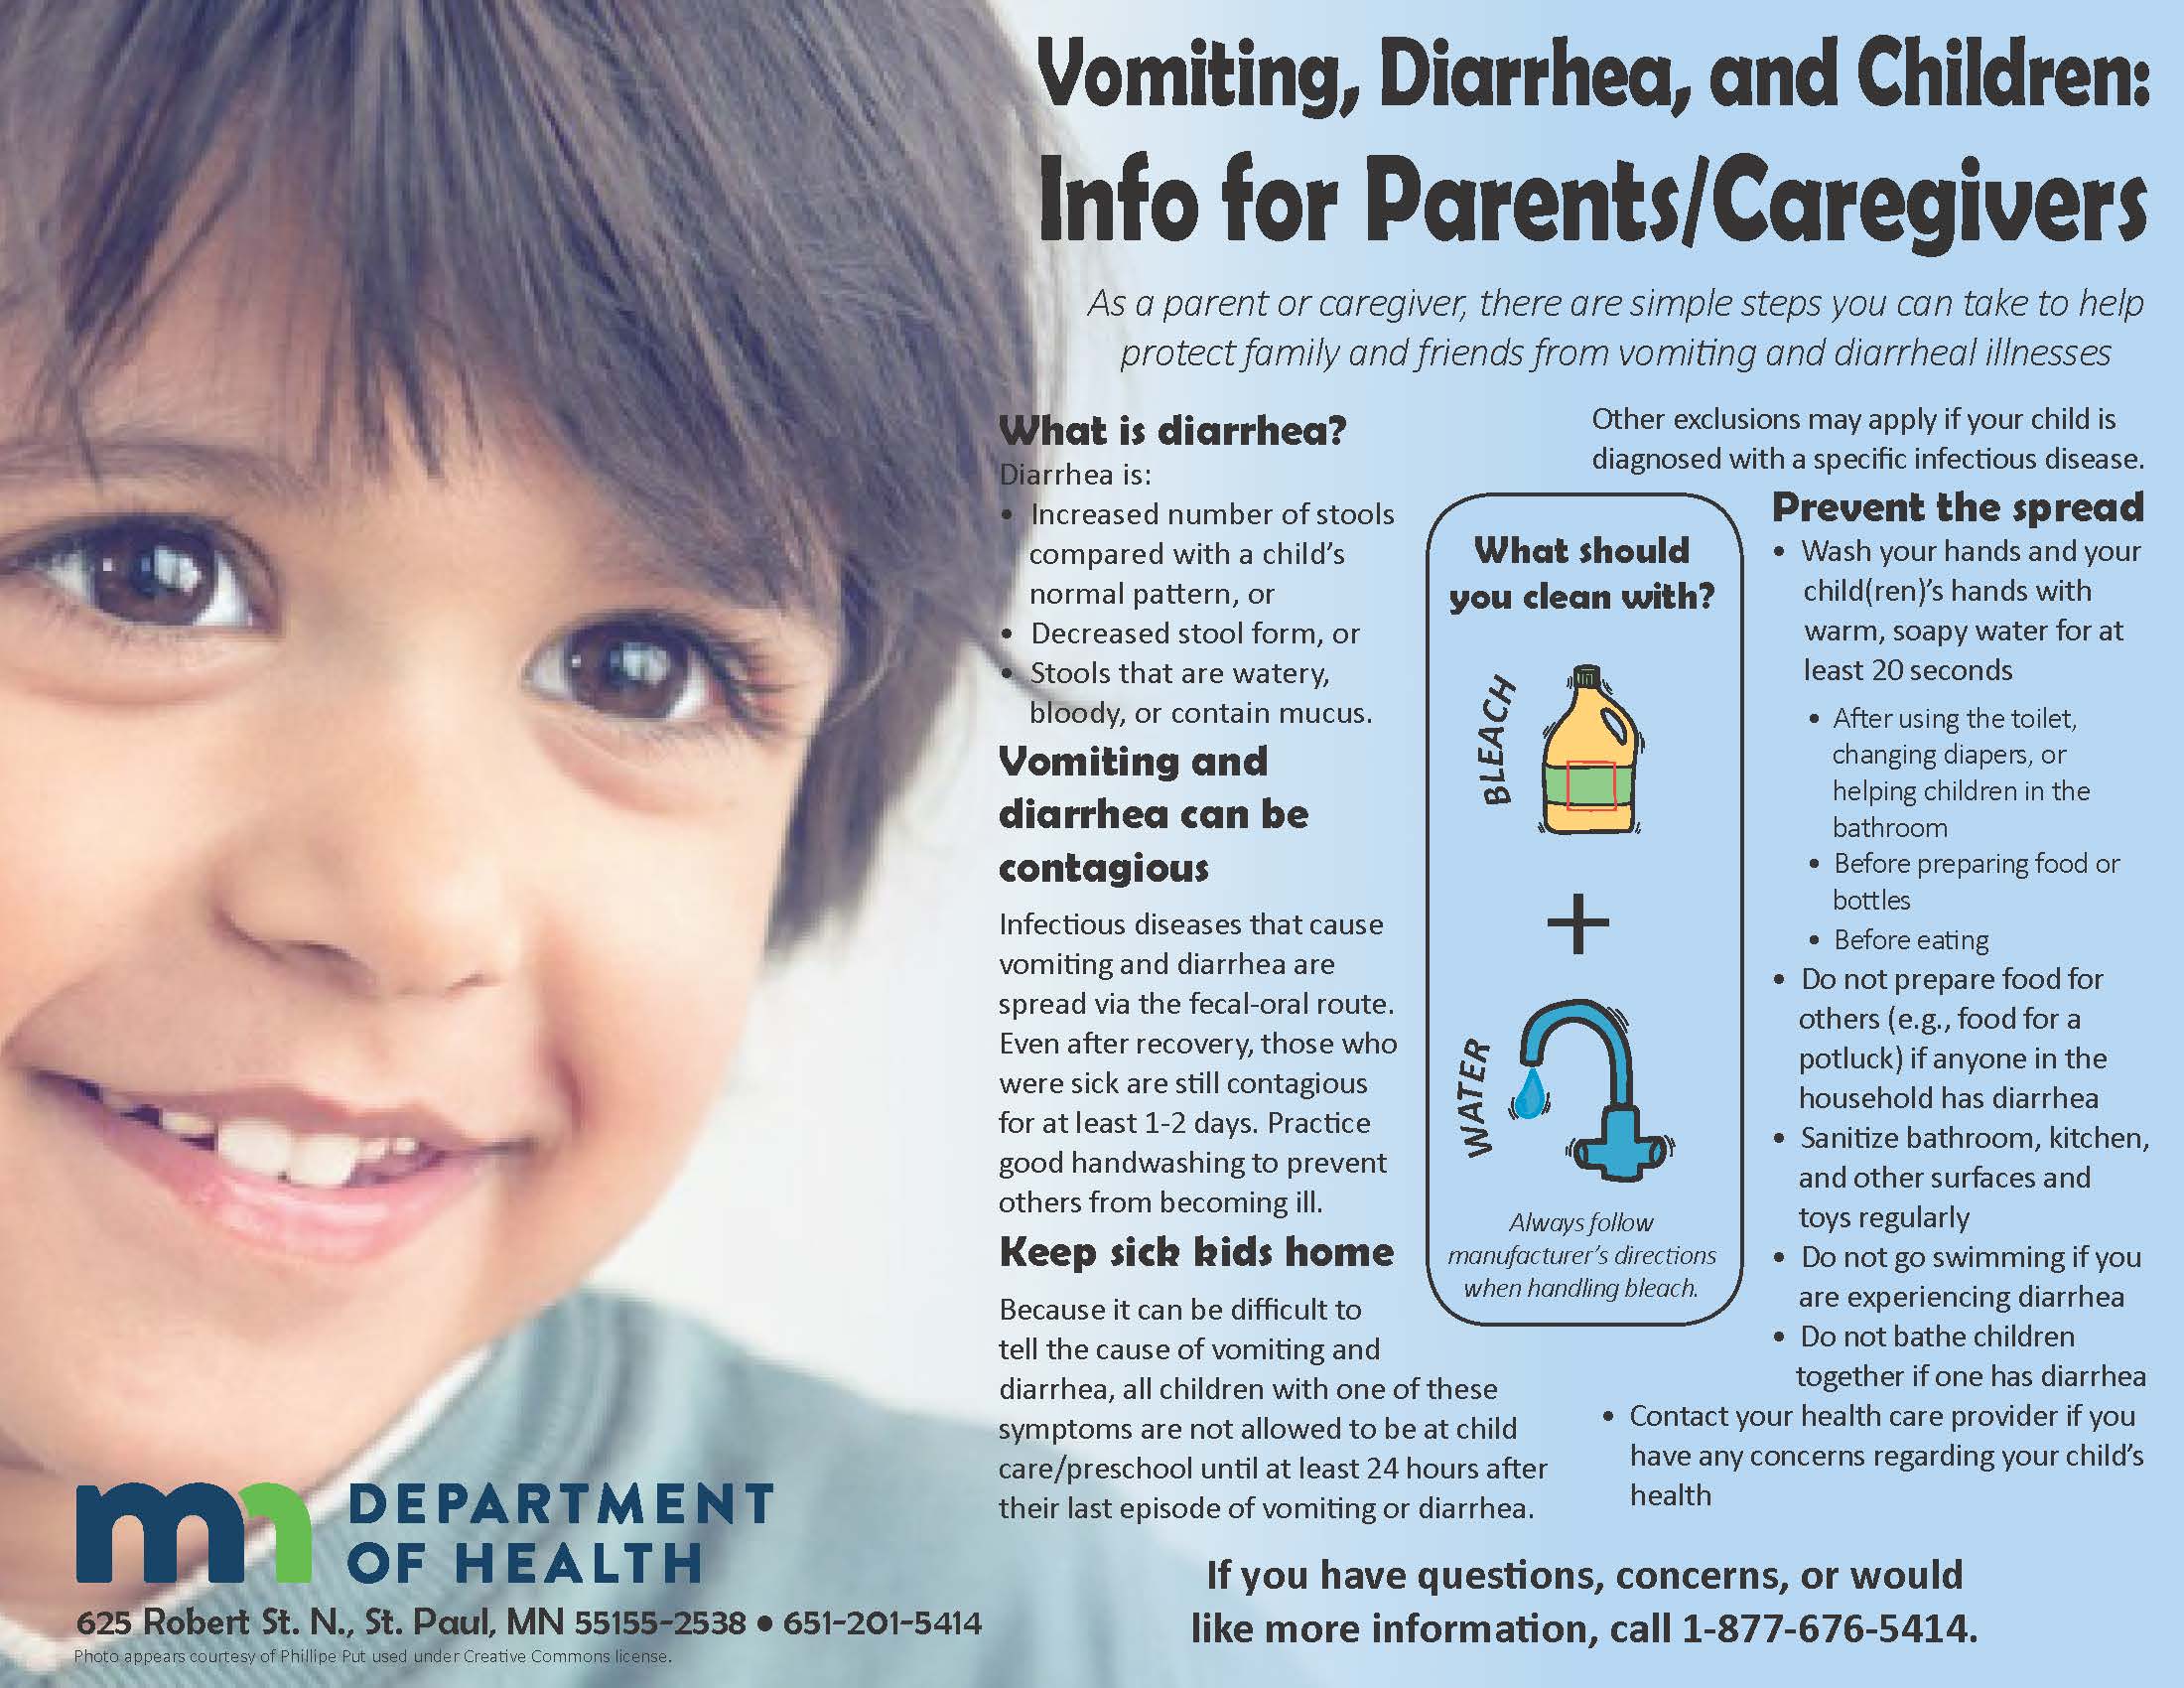 Vomiting, Diarrhea, and Childrenz: Information for Parents/Caregivers